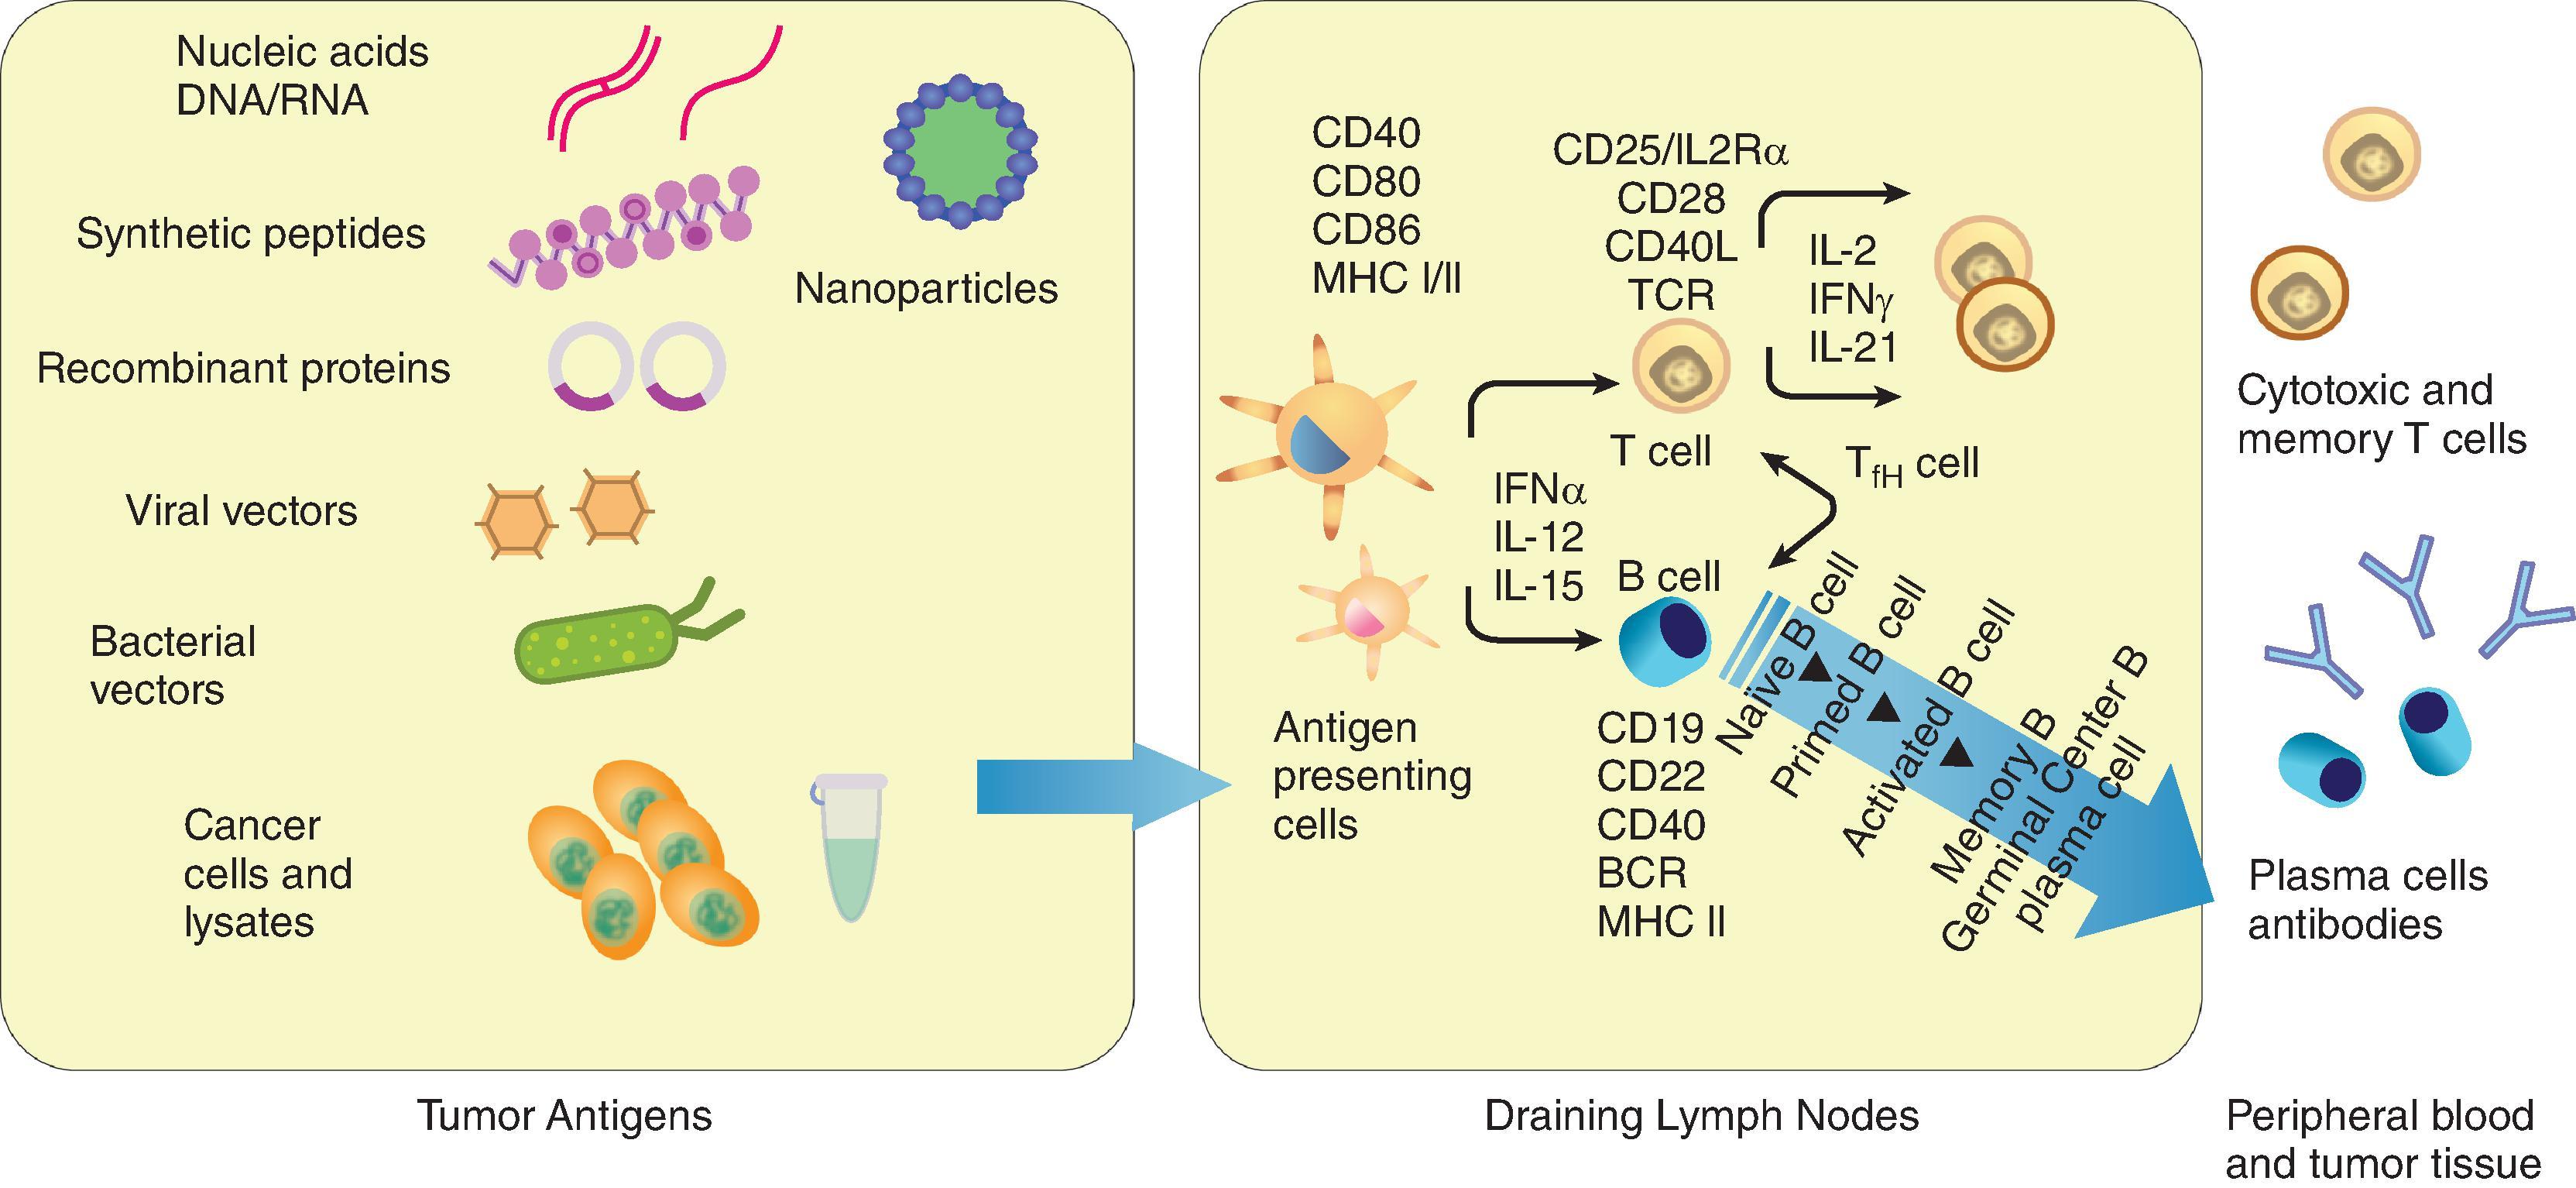 Fig. 14.4, Vaccine platforms and immune responses following vaccination in cancer. As the technology evolves, new platforms are added as shown in the addition of nanoparticles and mRNAs. With improved cell engineering technology and the addition of immunomodulatory agents, the role of cancer vaccines is getting more attention to work in a complementary and synergistic way with pre-existing and new investigational agents. These vaccine platforms can be designed to skew immune responses to different types of CD4 helper cells and to CD8 effector cells or antibody-producing B cells.